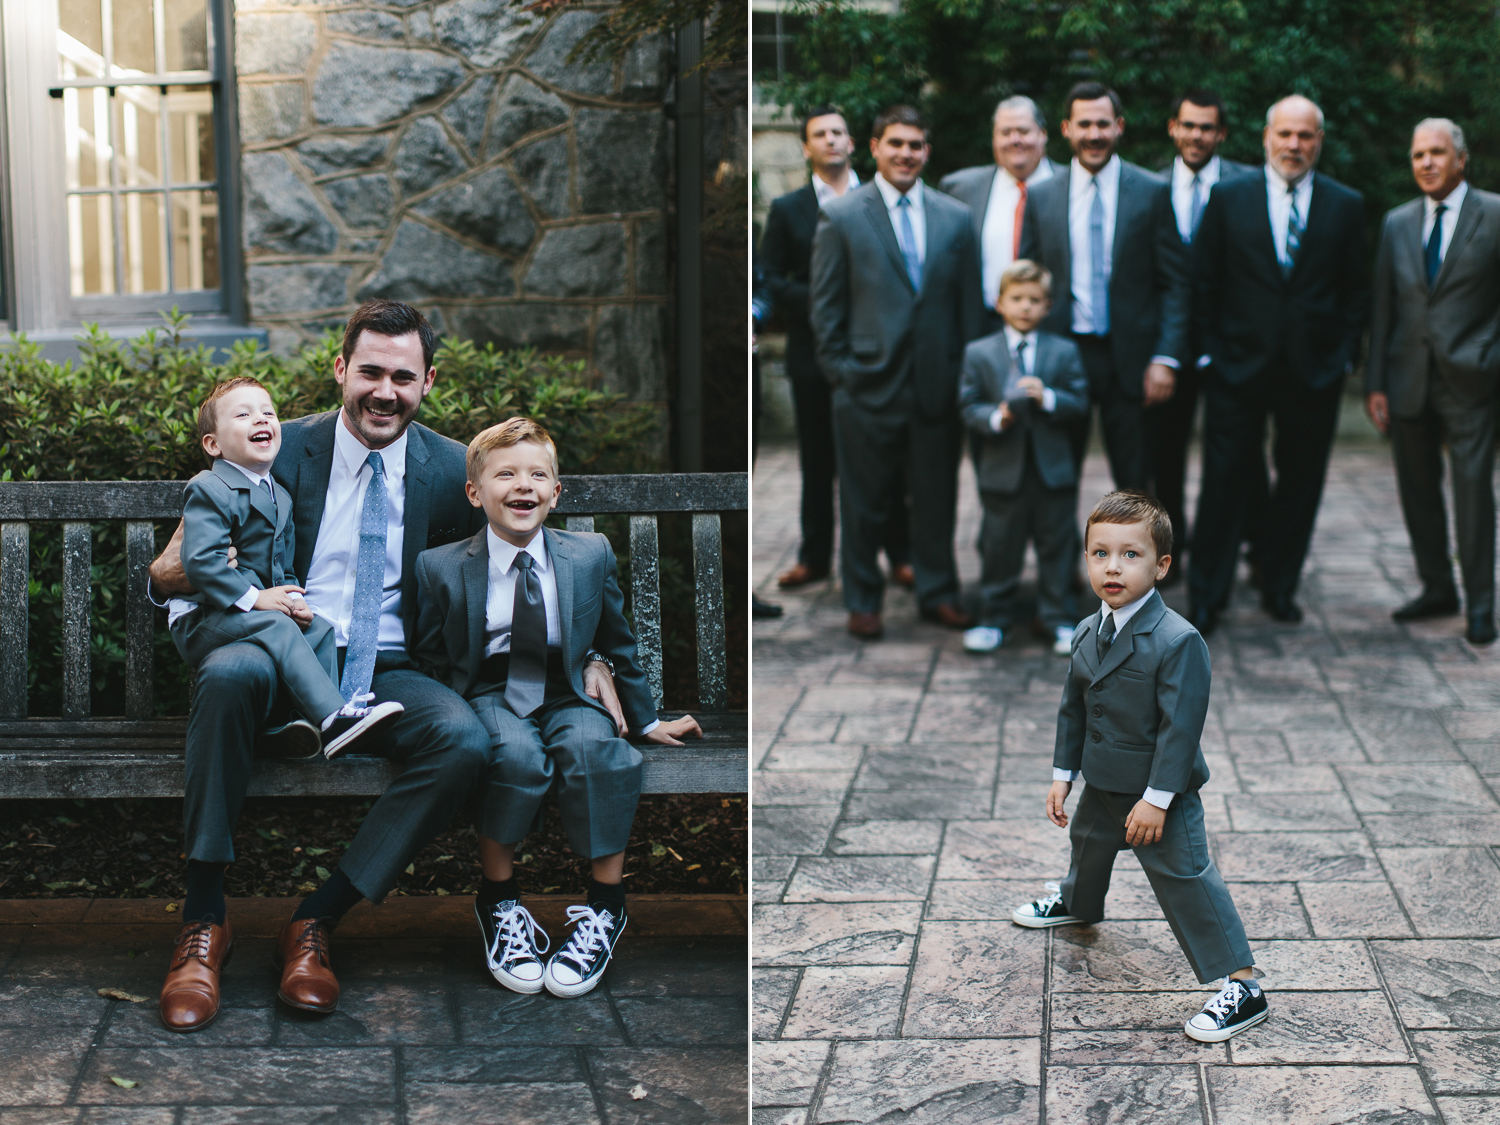 Cutest ring bearer in his suit